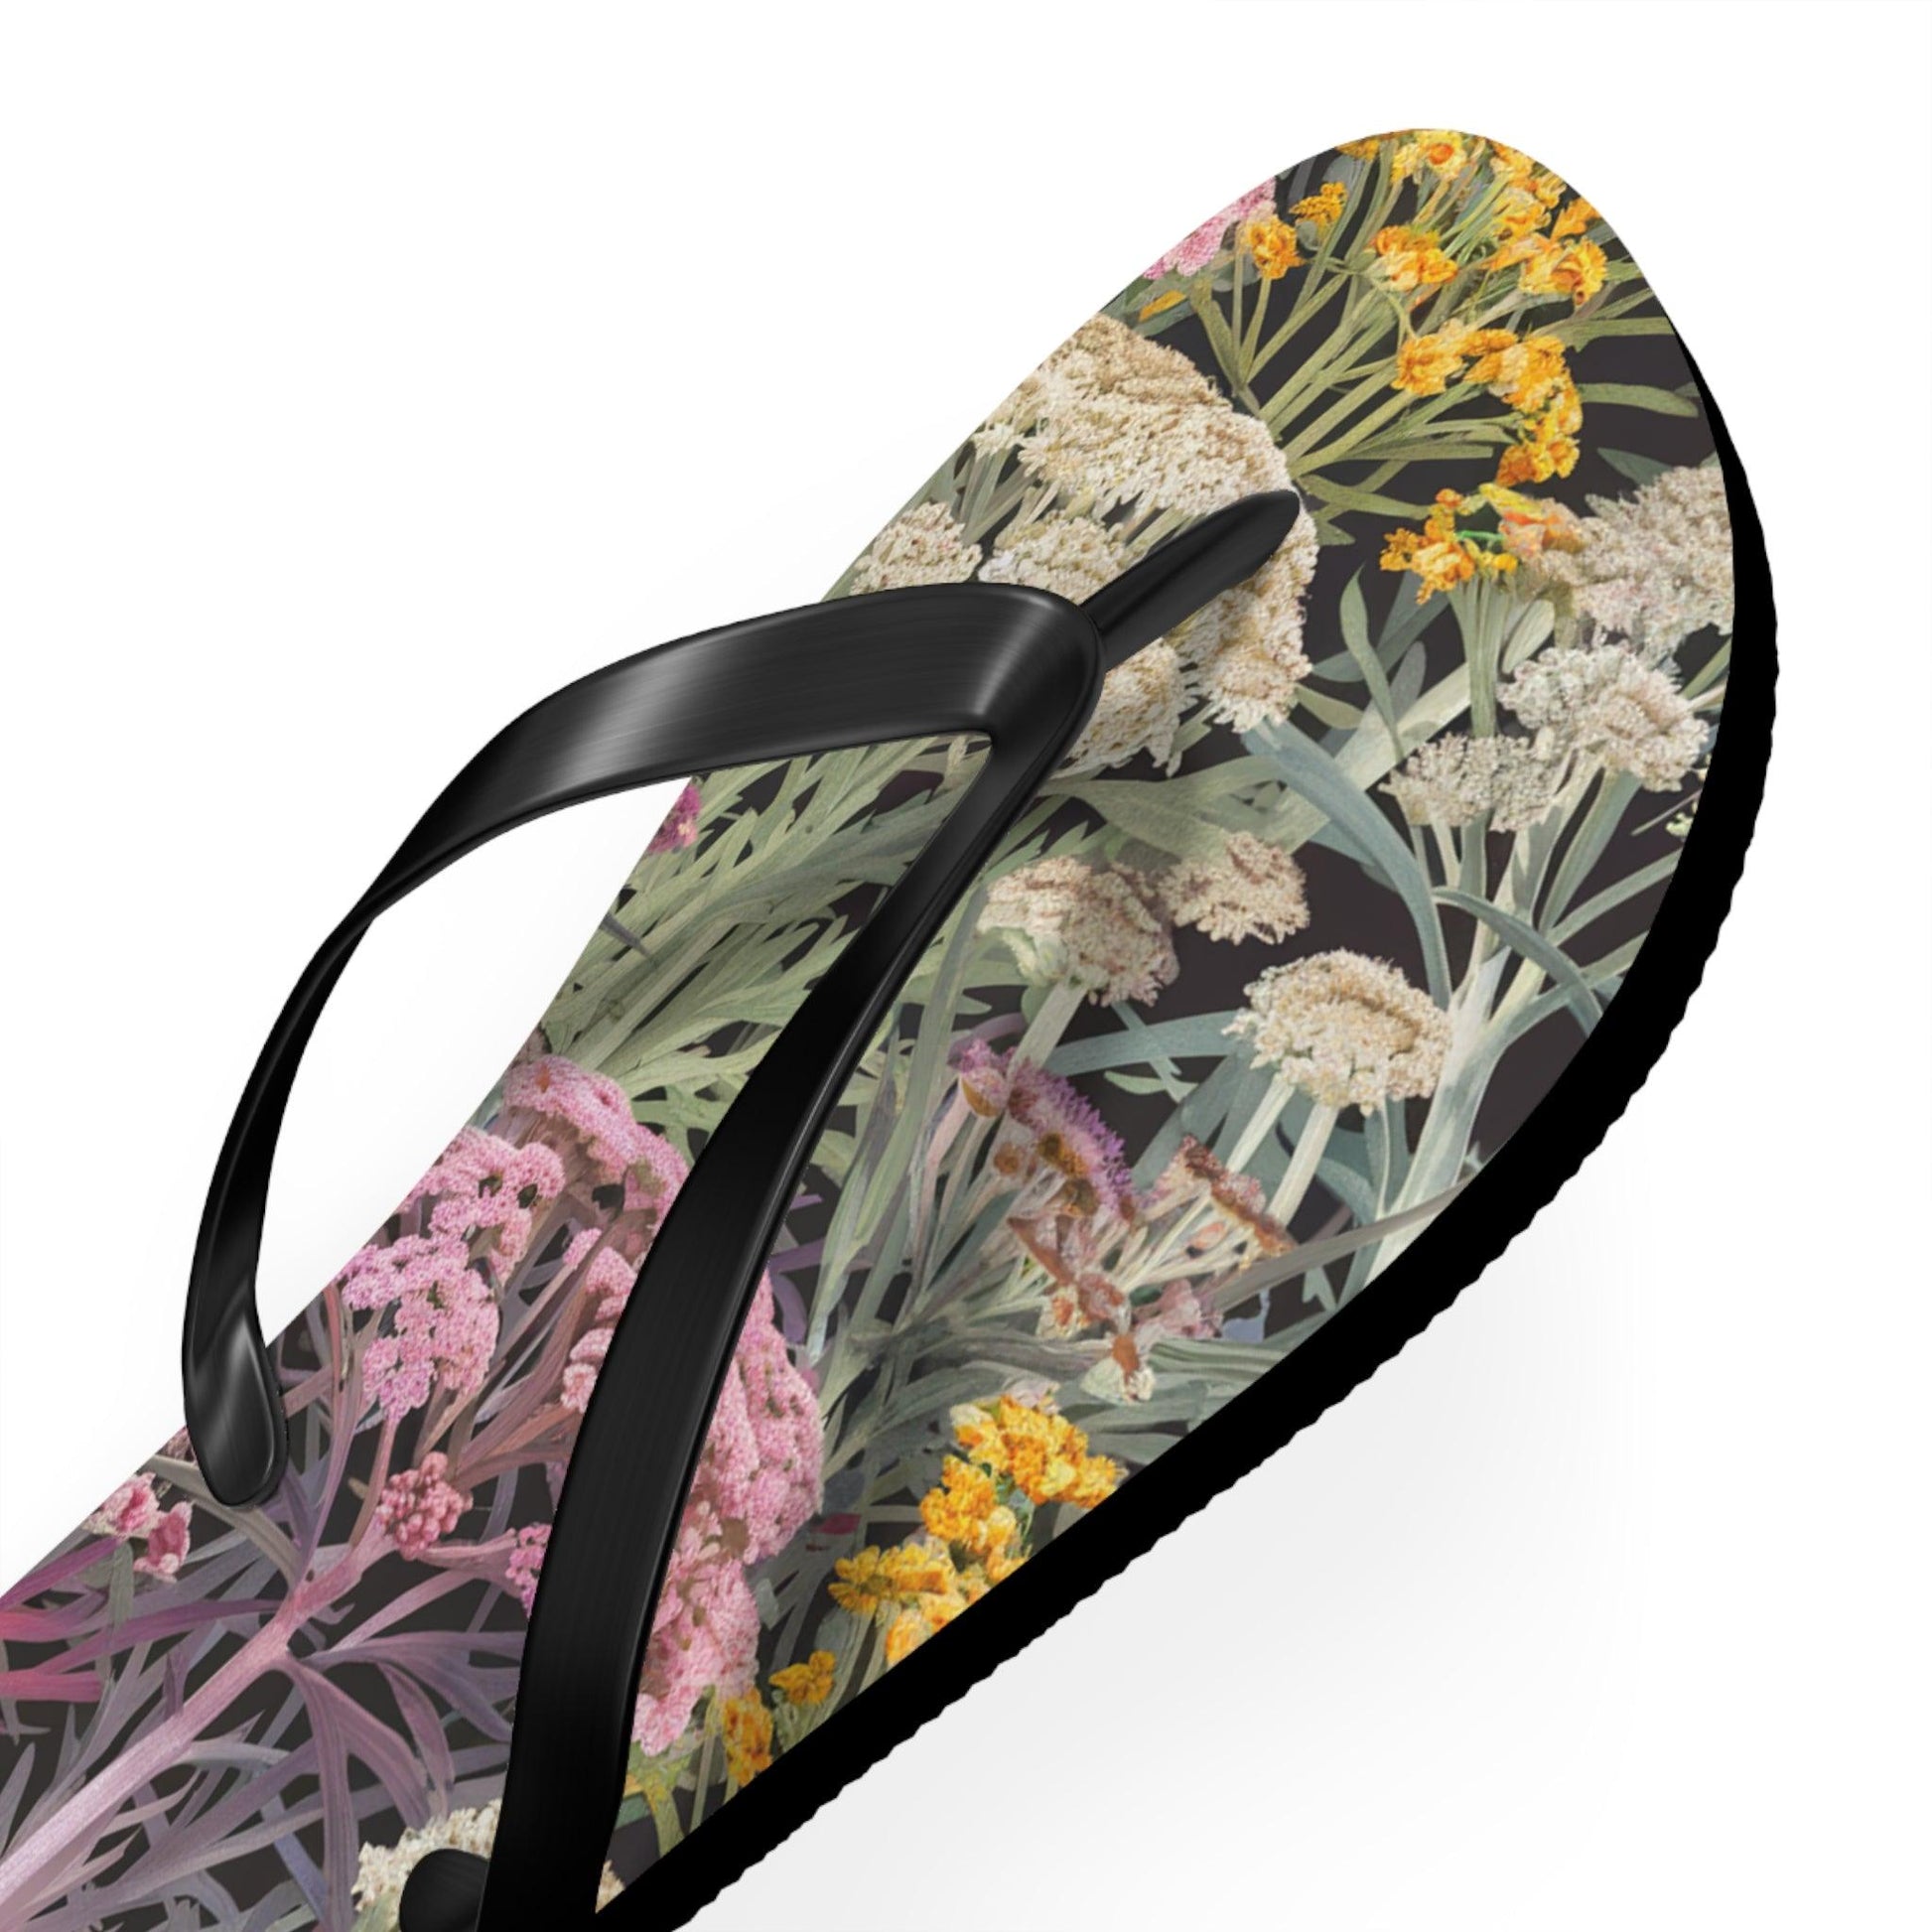 Yarrow Flower Inspired Flip Flops, Express Your Beach Loving Self - Coastal Collections